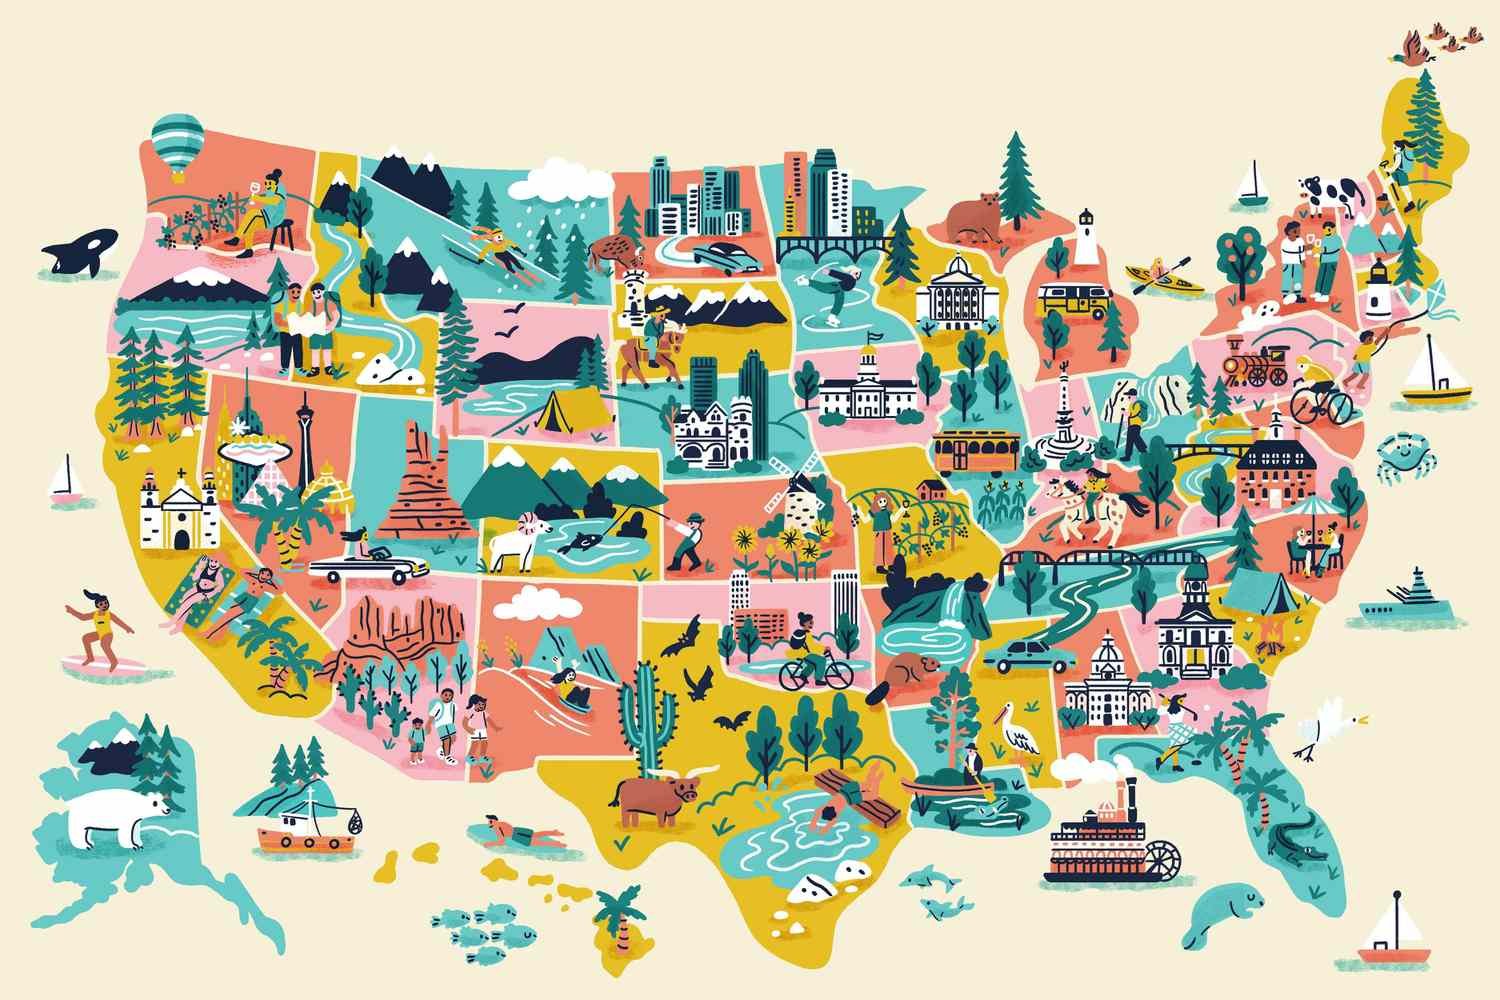 The Best Staycation in Every State